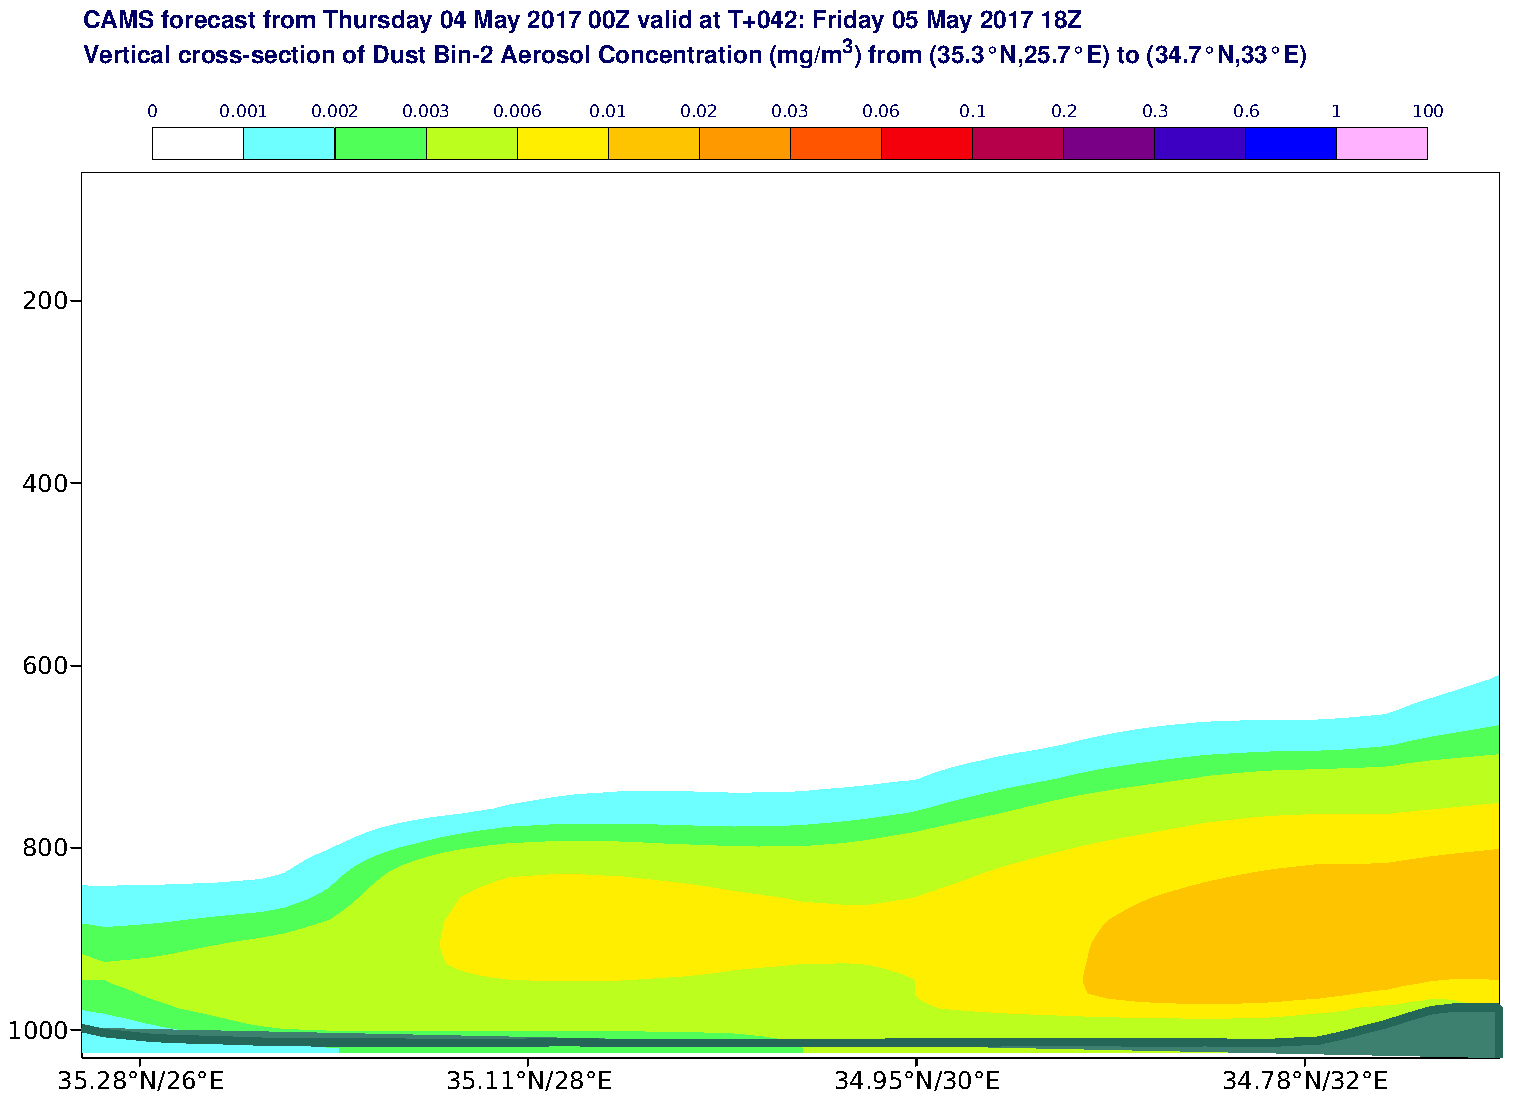 Vertical cross-section of Dust Bin-2 Aerosol Concentration (mg/m3) valid at T42 - 2017-05-05 18:00